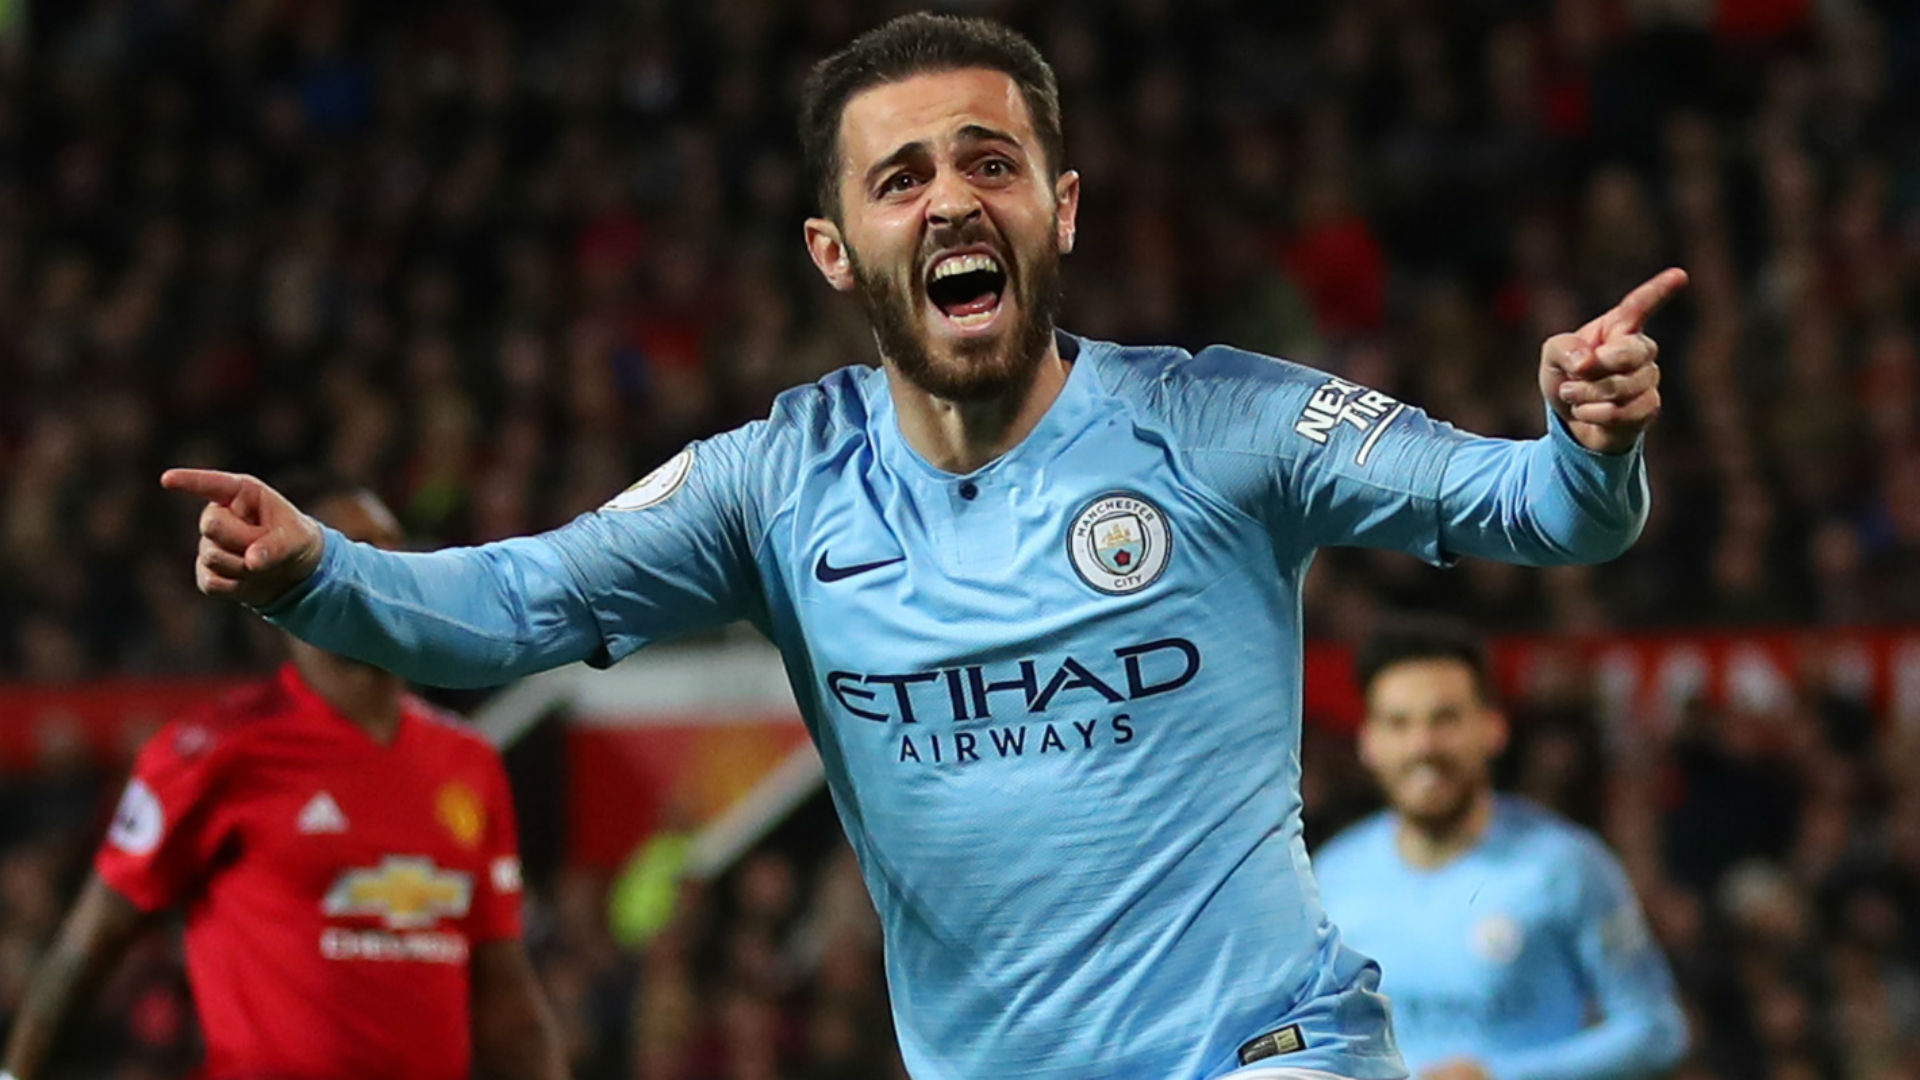 Manchester City's Bernardo Silva has no intention of taking down his Christmas tree after it has brought him good luck in 2019.